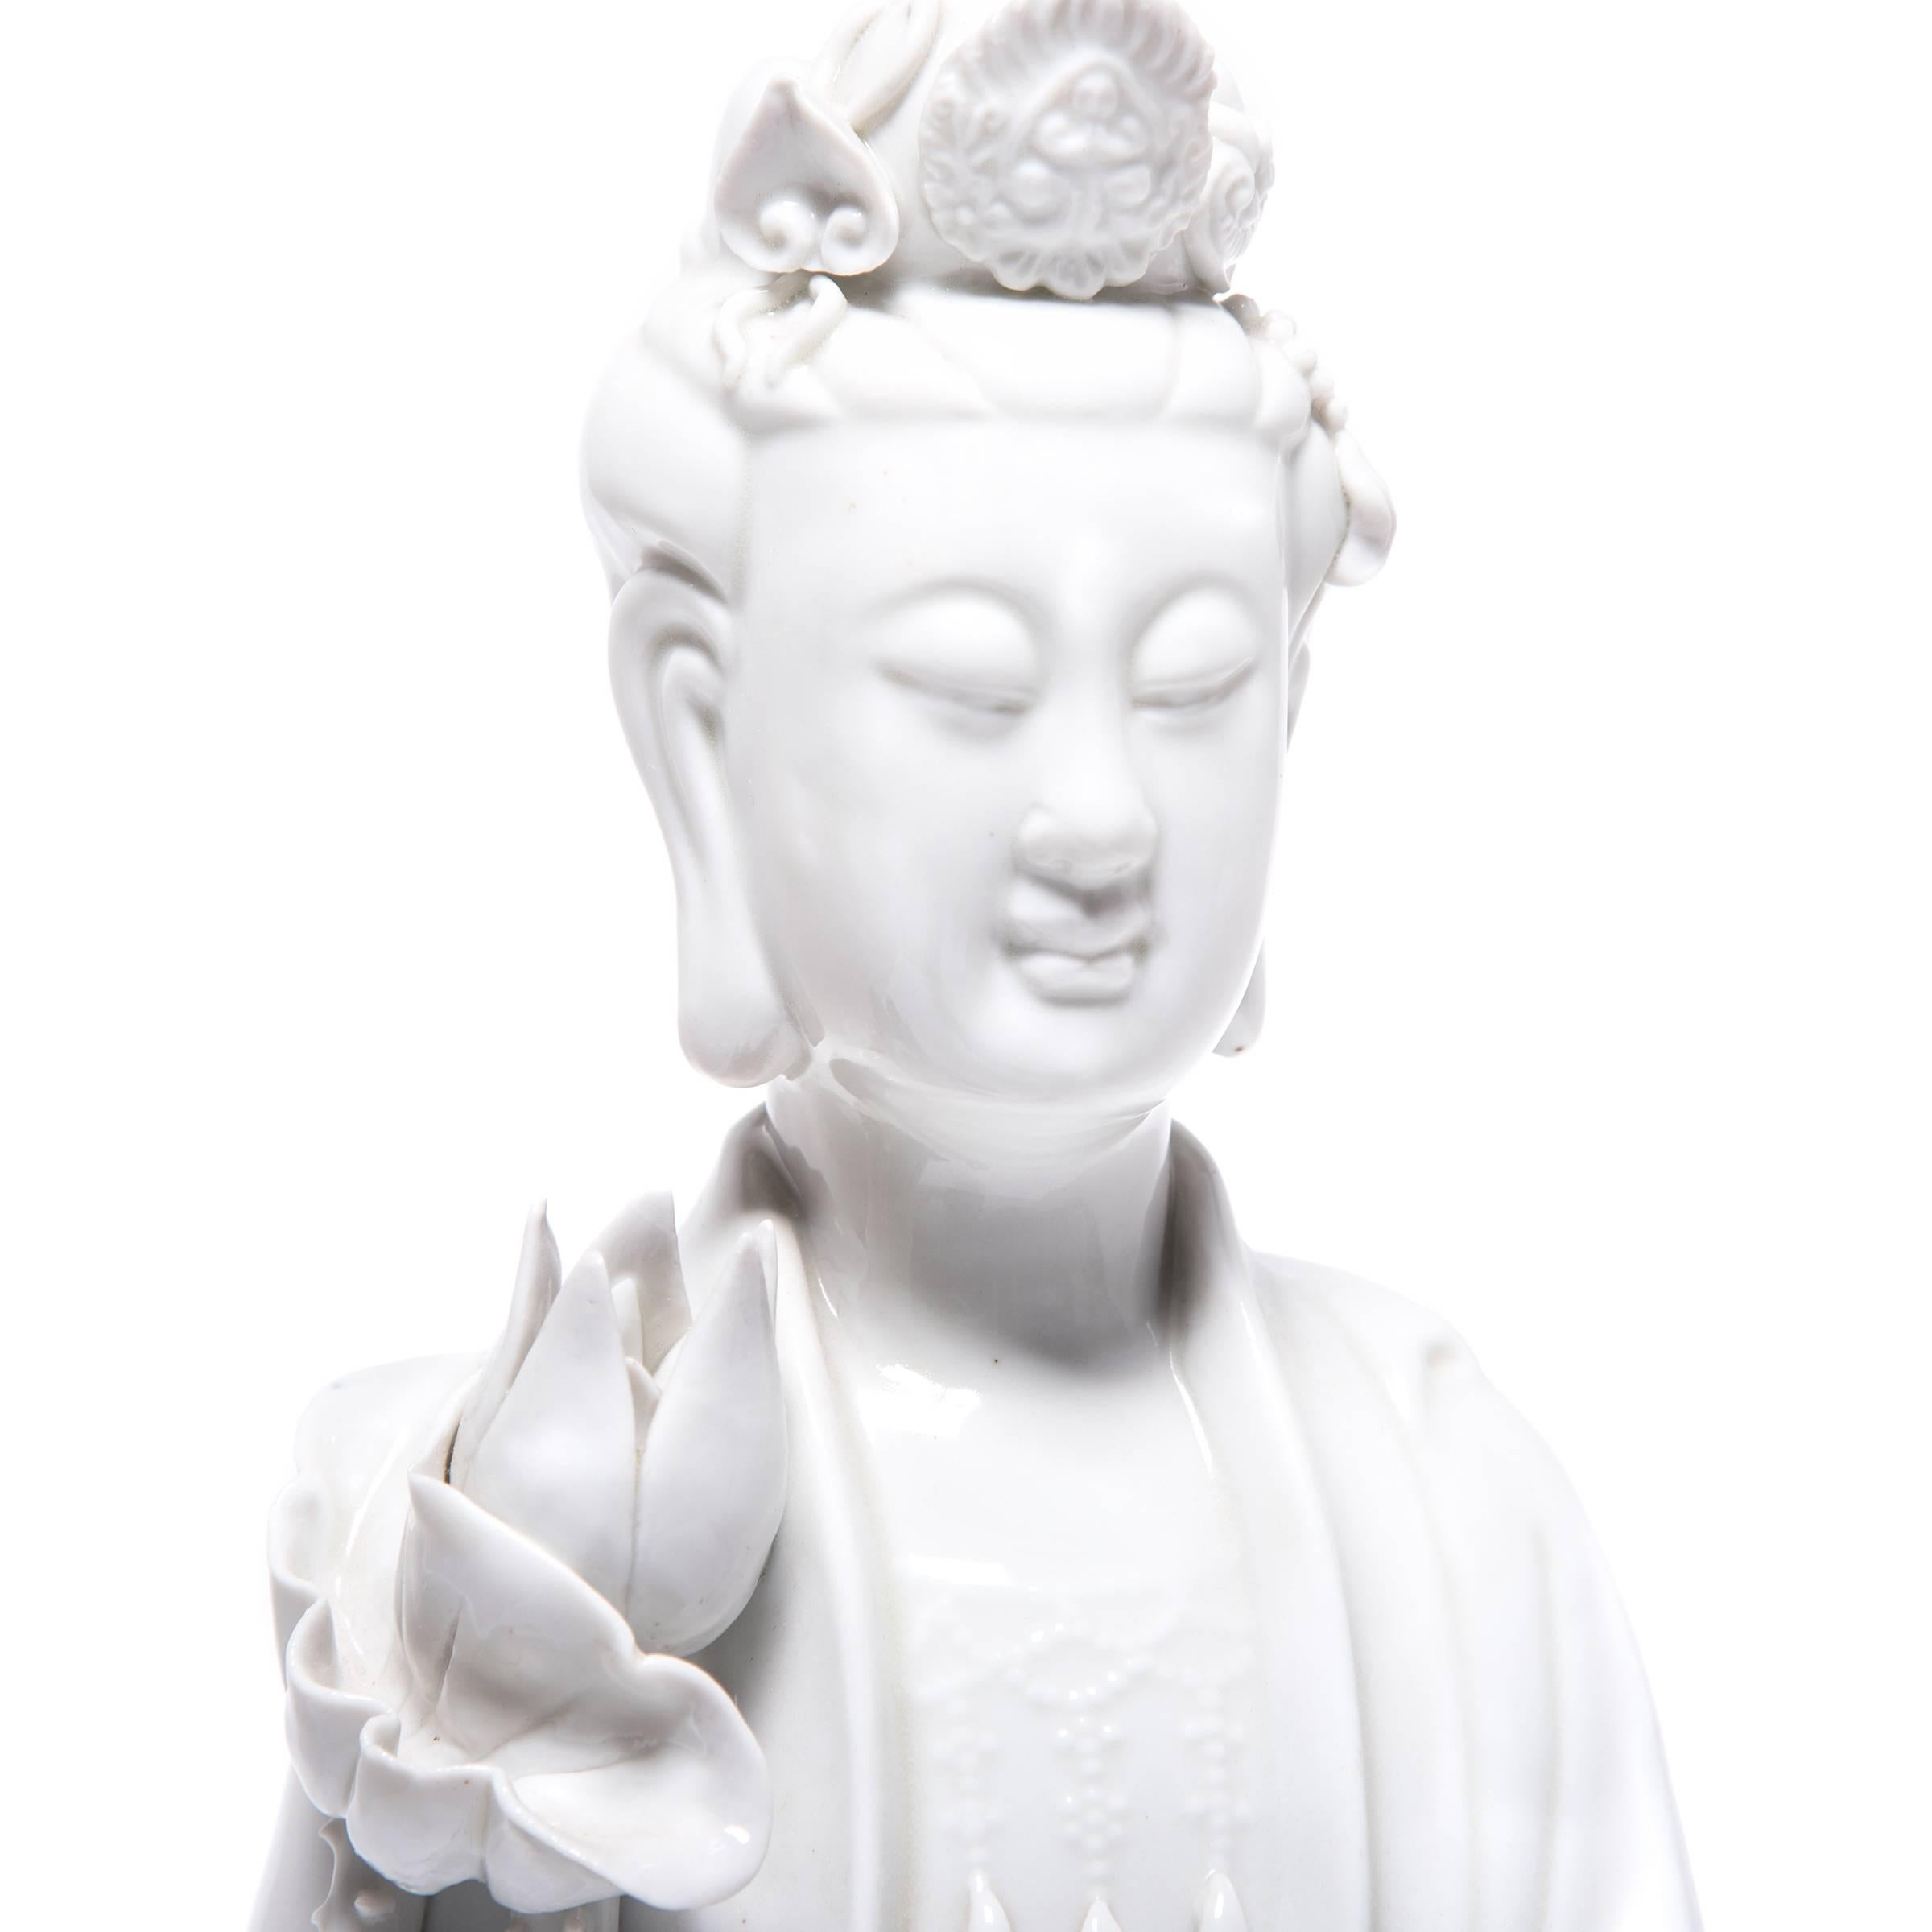 A symbol of compassion and wisdom, Guanyin is a bodhisattva venerated by Buddhists and Taoists alike. This exquisite porcelain sculpture from the early 20th century depicts the serene-faced goddess holding lotus plants, symbols of purity and